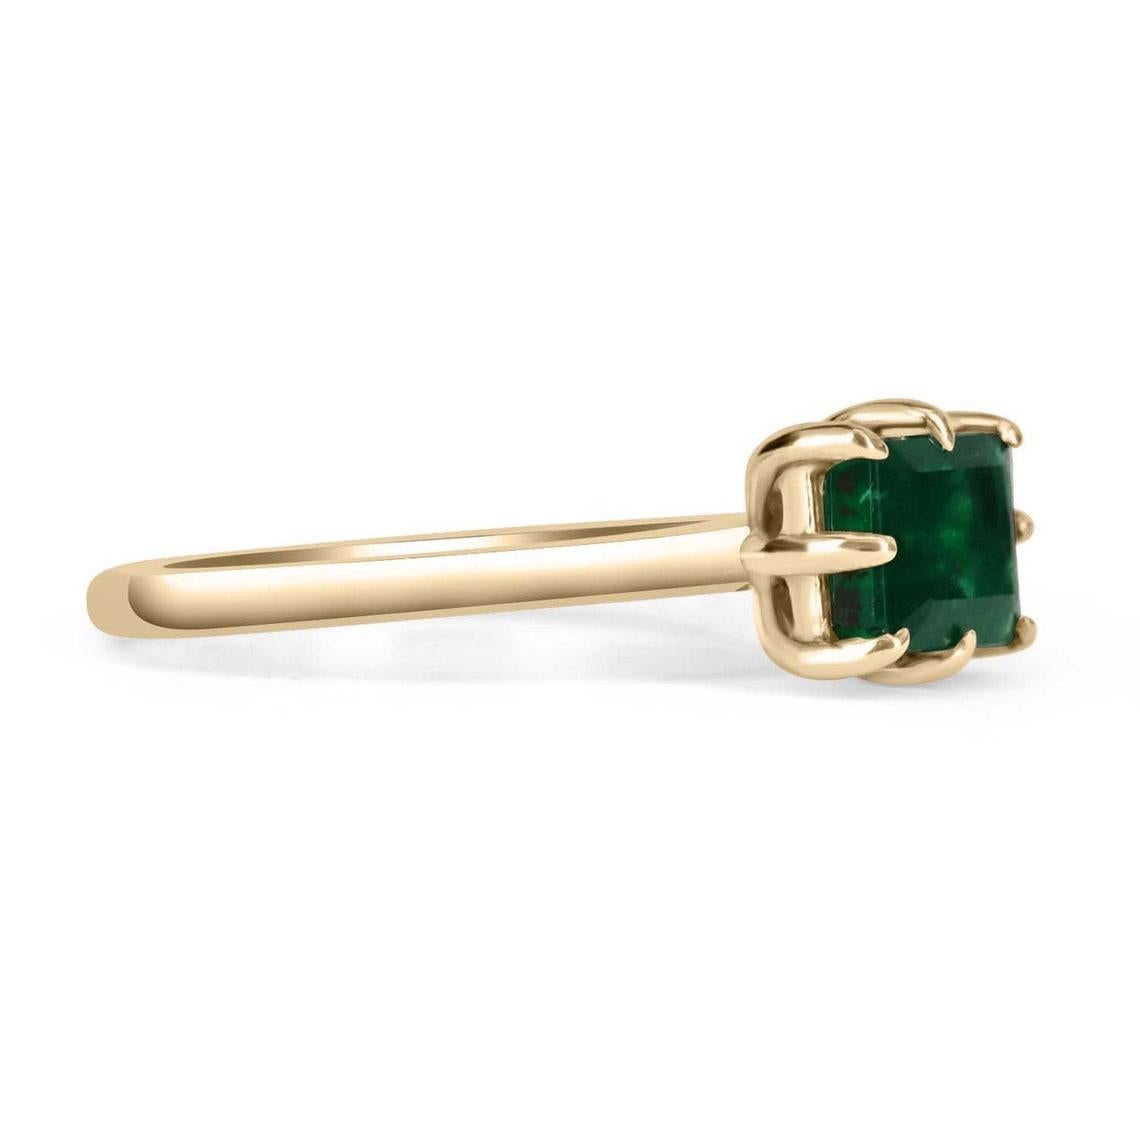 Displayed is an East to West DARK rare emerald solitaire emerald-cut engagement ring/right-hand ring in 14K yellow gold. This gorgeous solitaire ring carries a full 1.50-carat emerald in an eight-prong setting. Fully faceted, this gemstone showcases